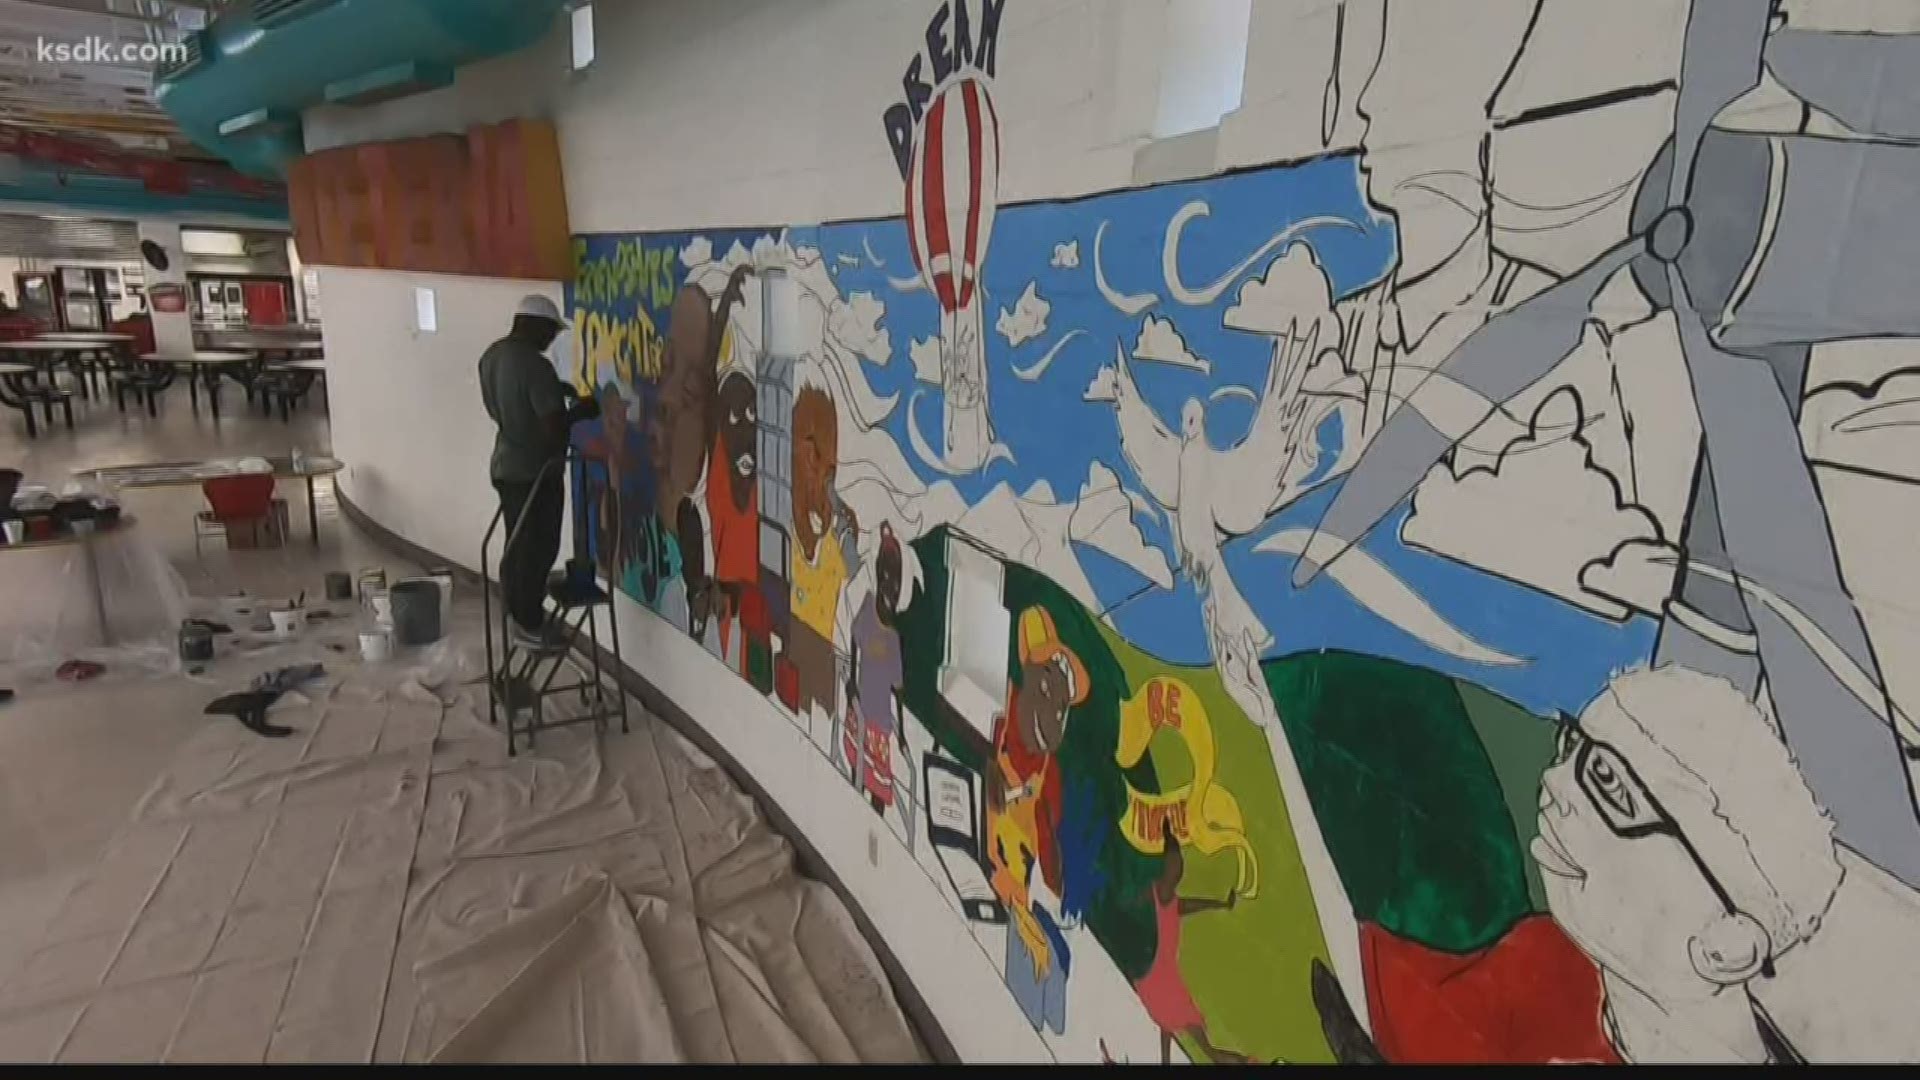 Local artist paints mural to inspire students